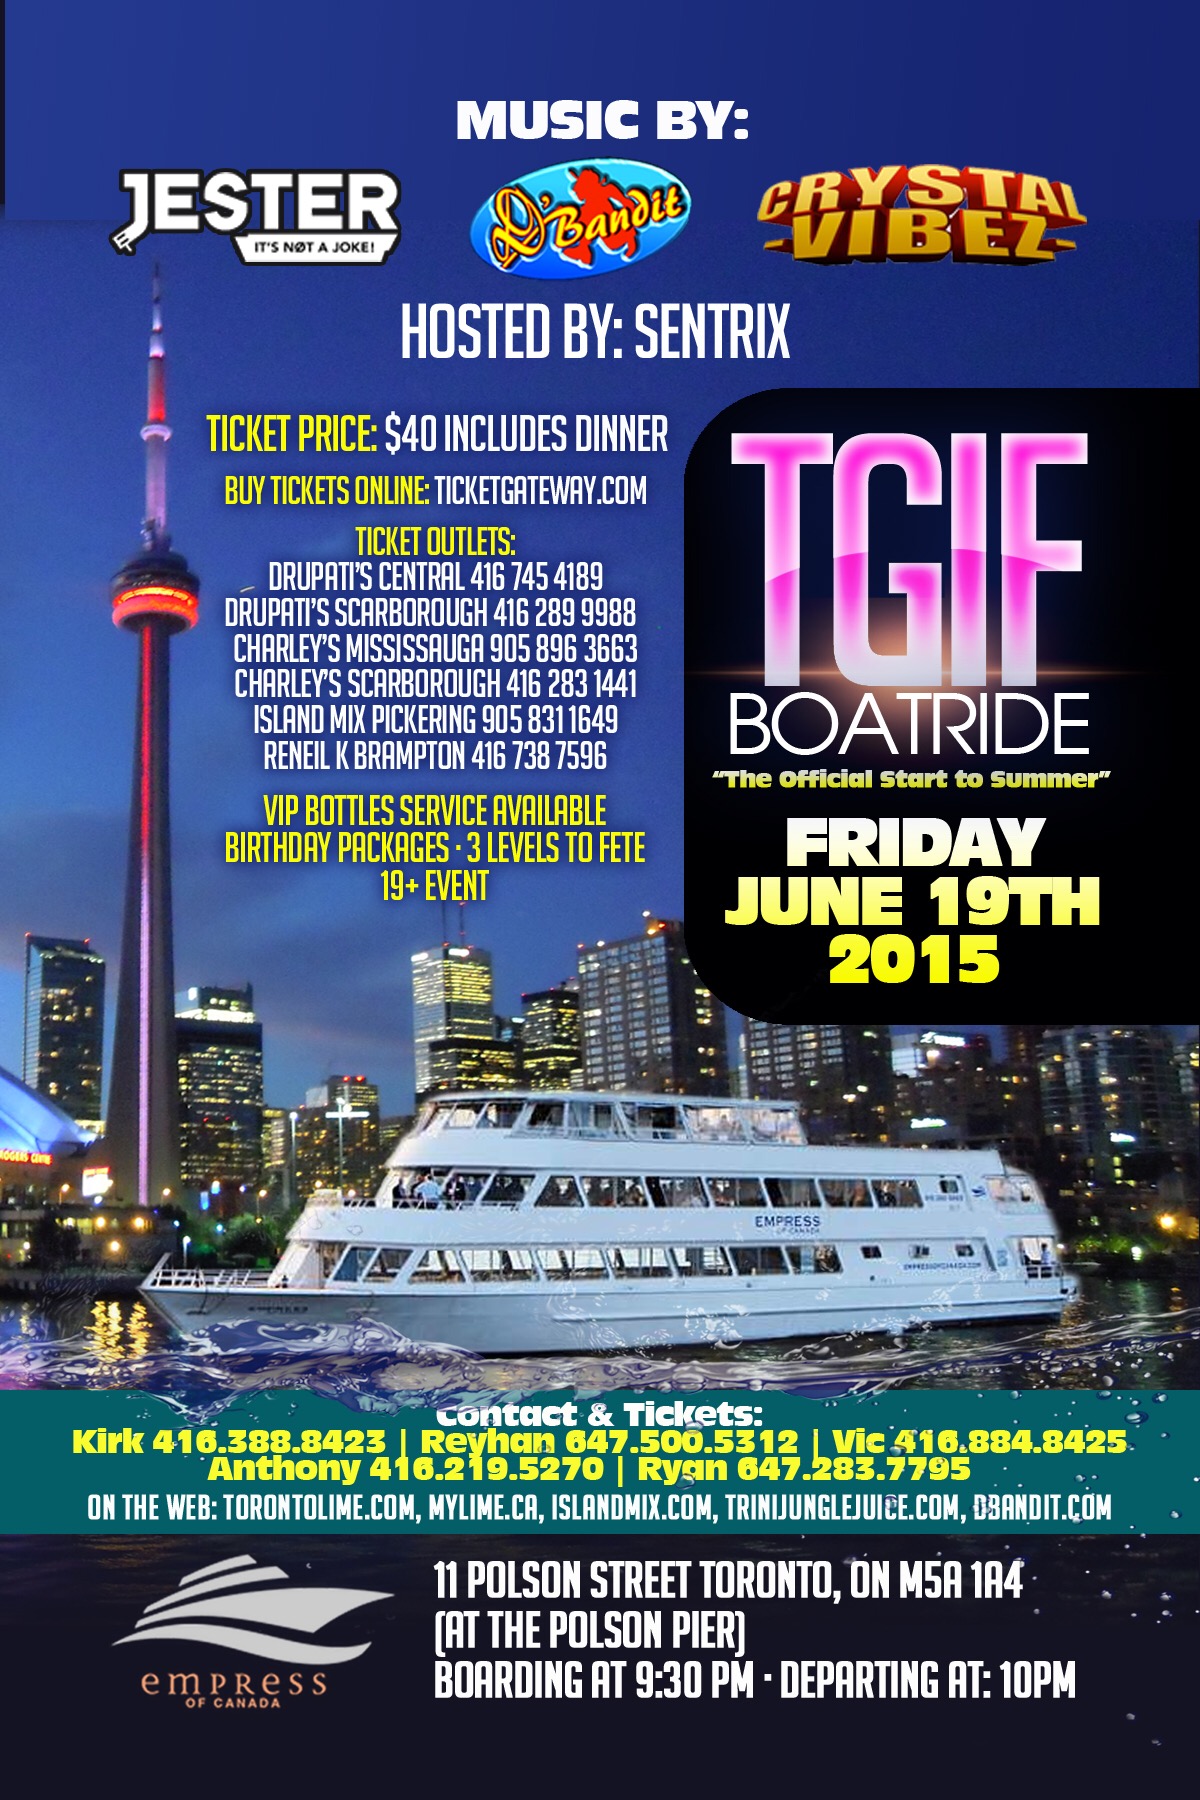 T G I F Boatride - The Official Start to Summer